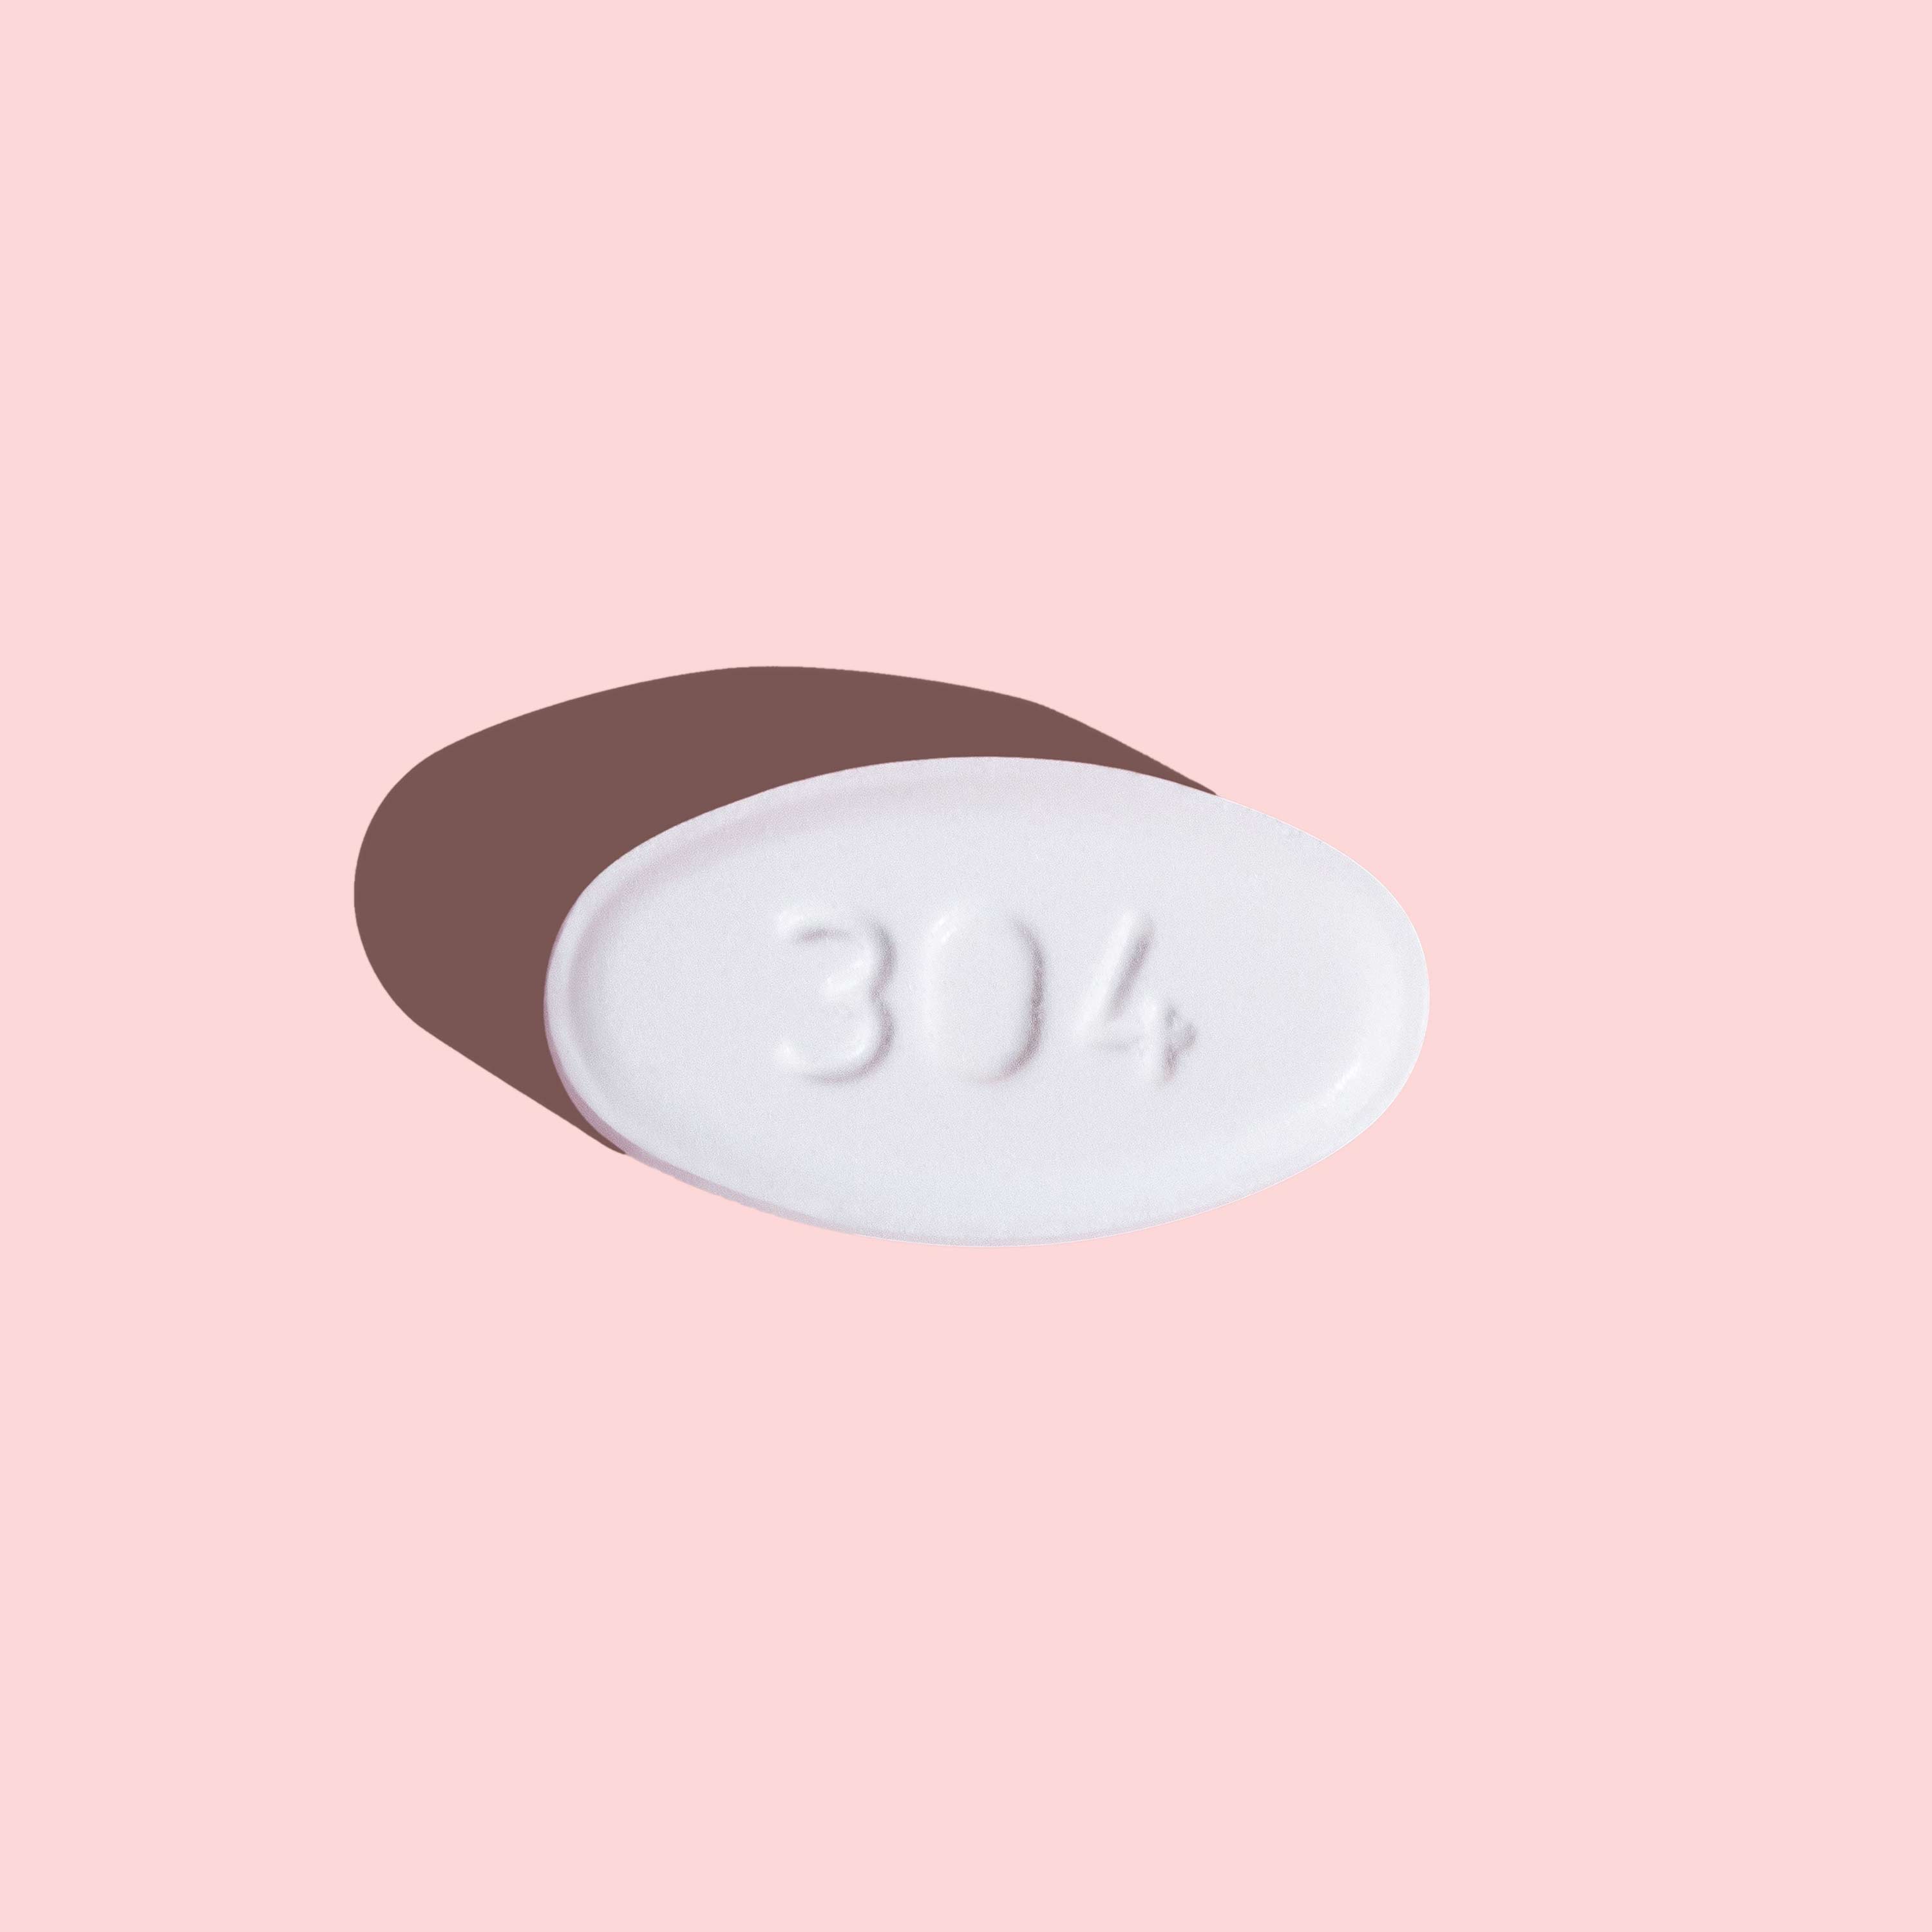 Single Norethindrone Acetate pill to delay your period on a pink background